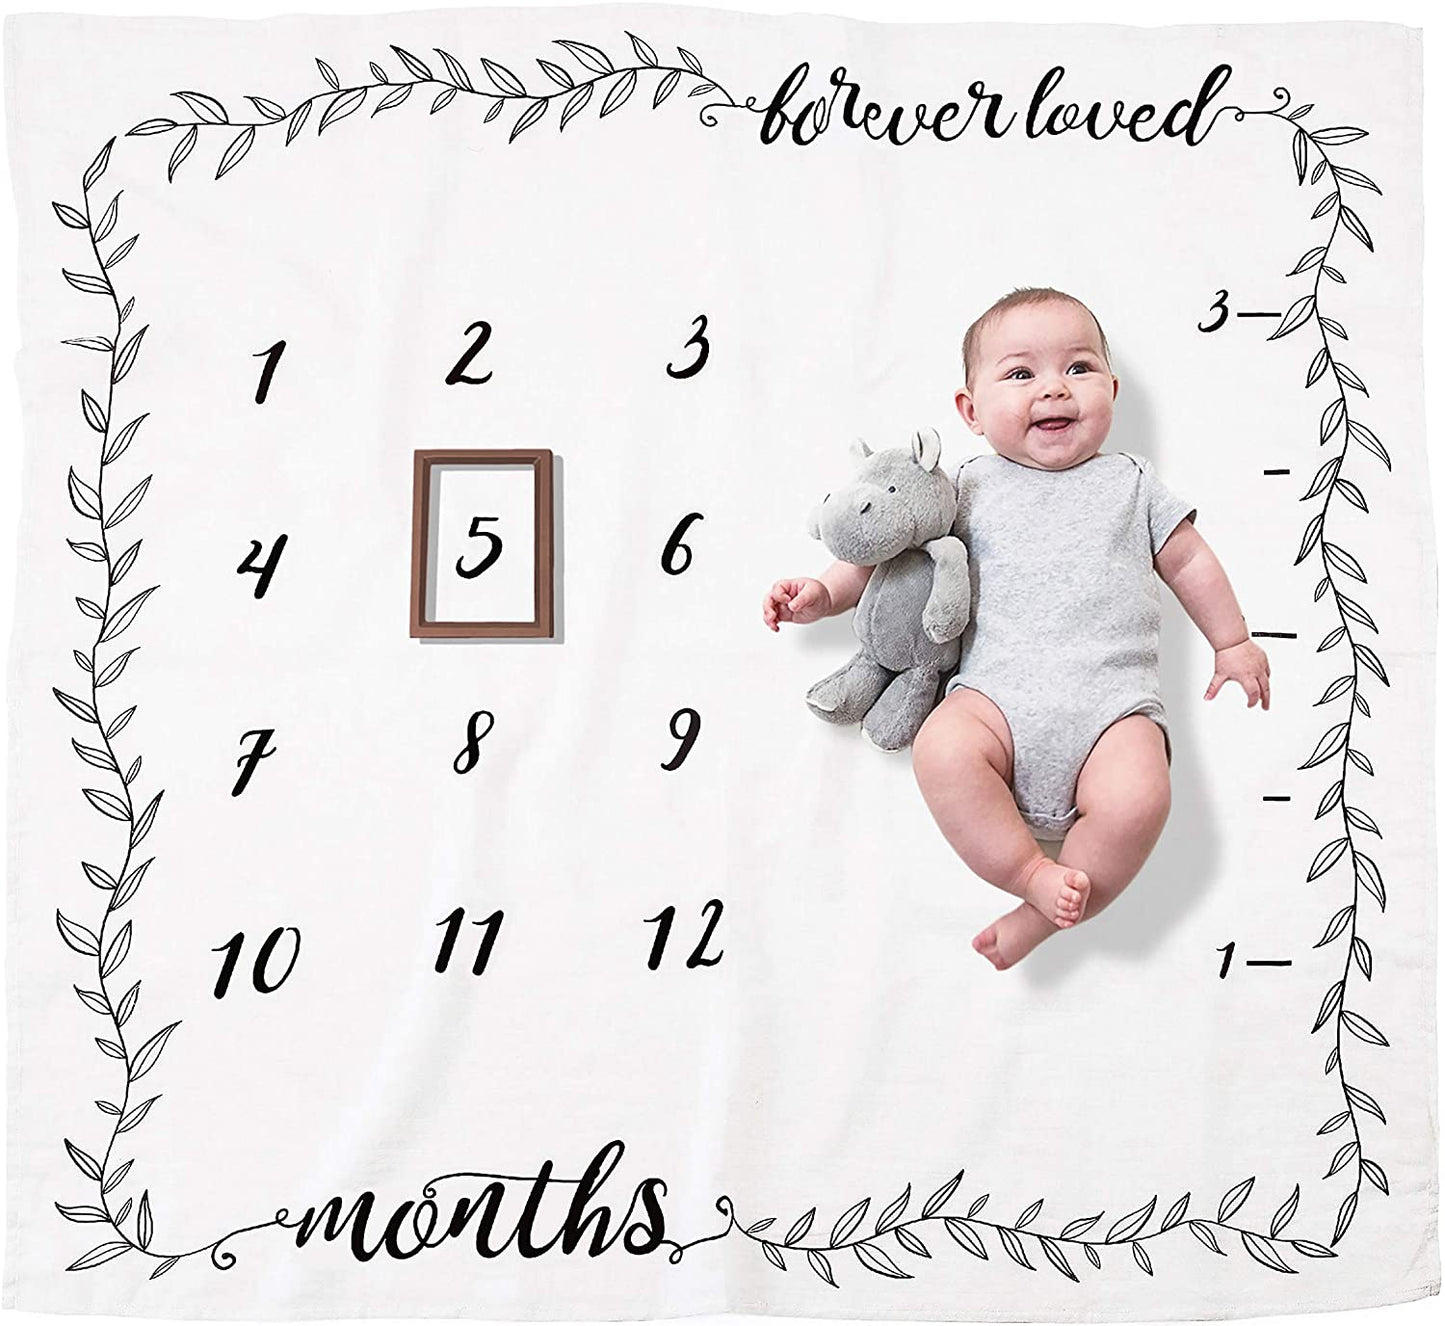 Organic Baby Monthly Milestone Blanket Boy or Girl - Milestone Blanket Neutral with Wood Frame - Forever Loved Baby Month Blanket with Growth Chart, 1-12 Months Milestones, 47”x47” - (For 1 piece(s))